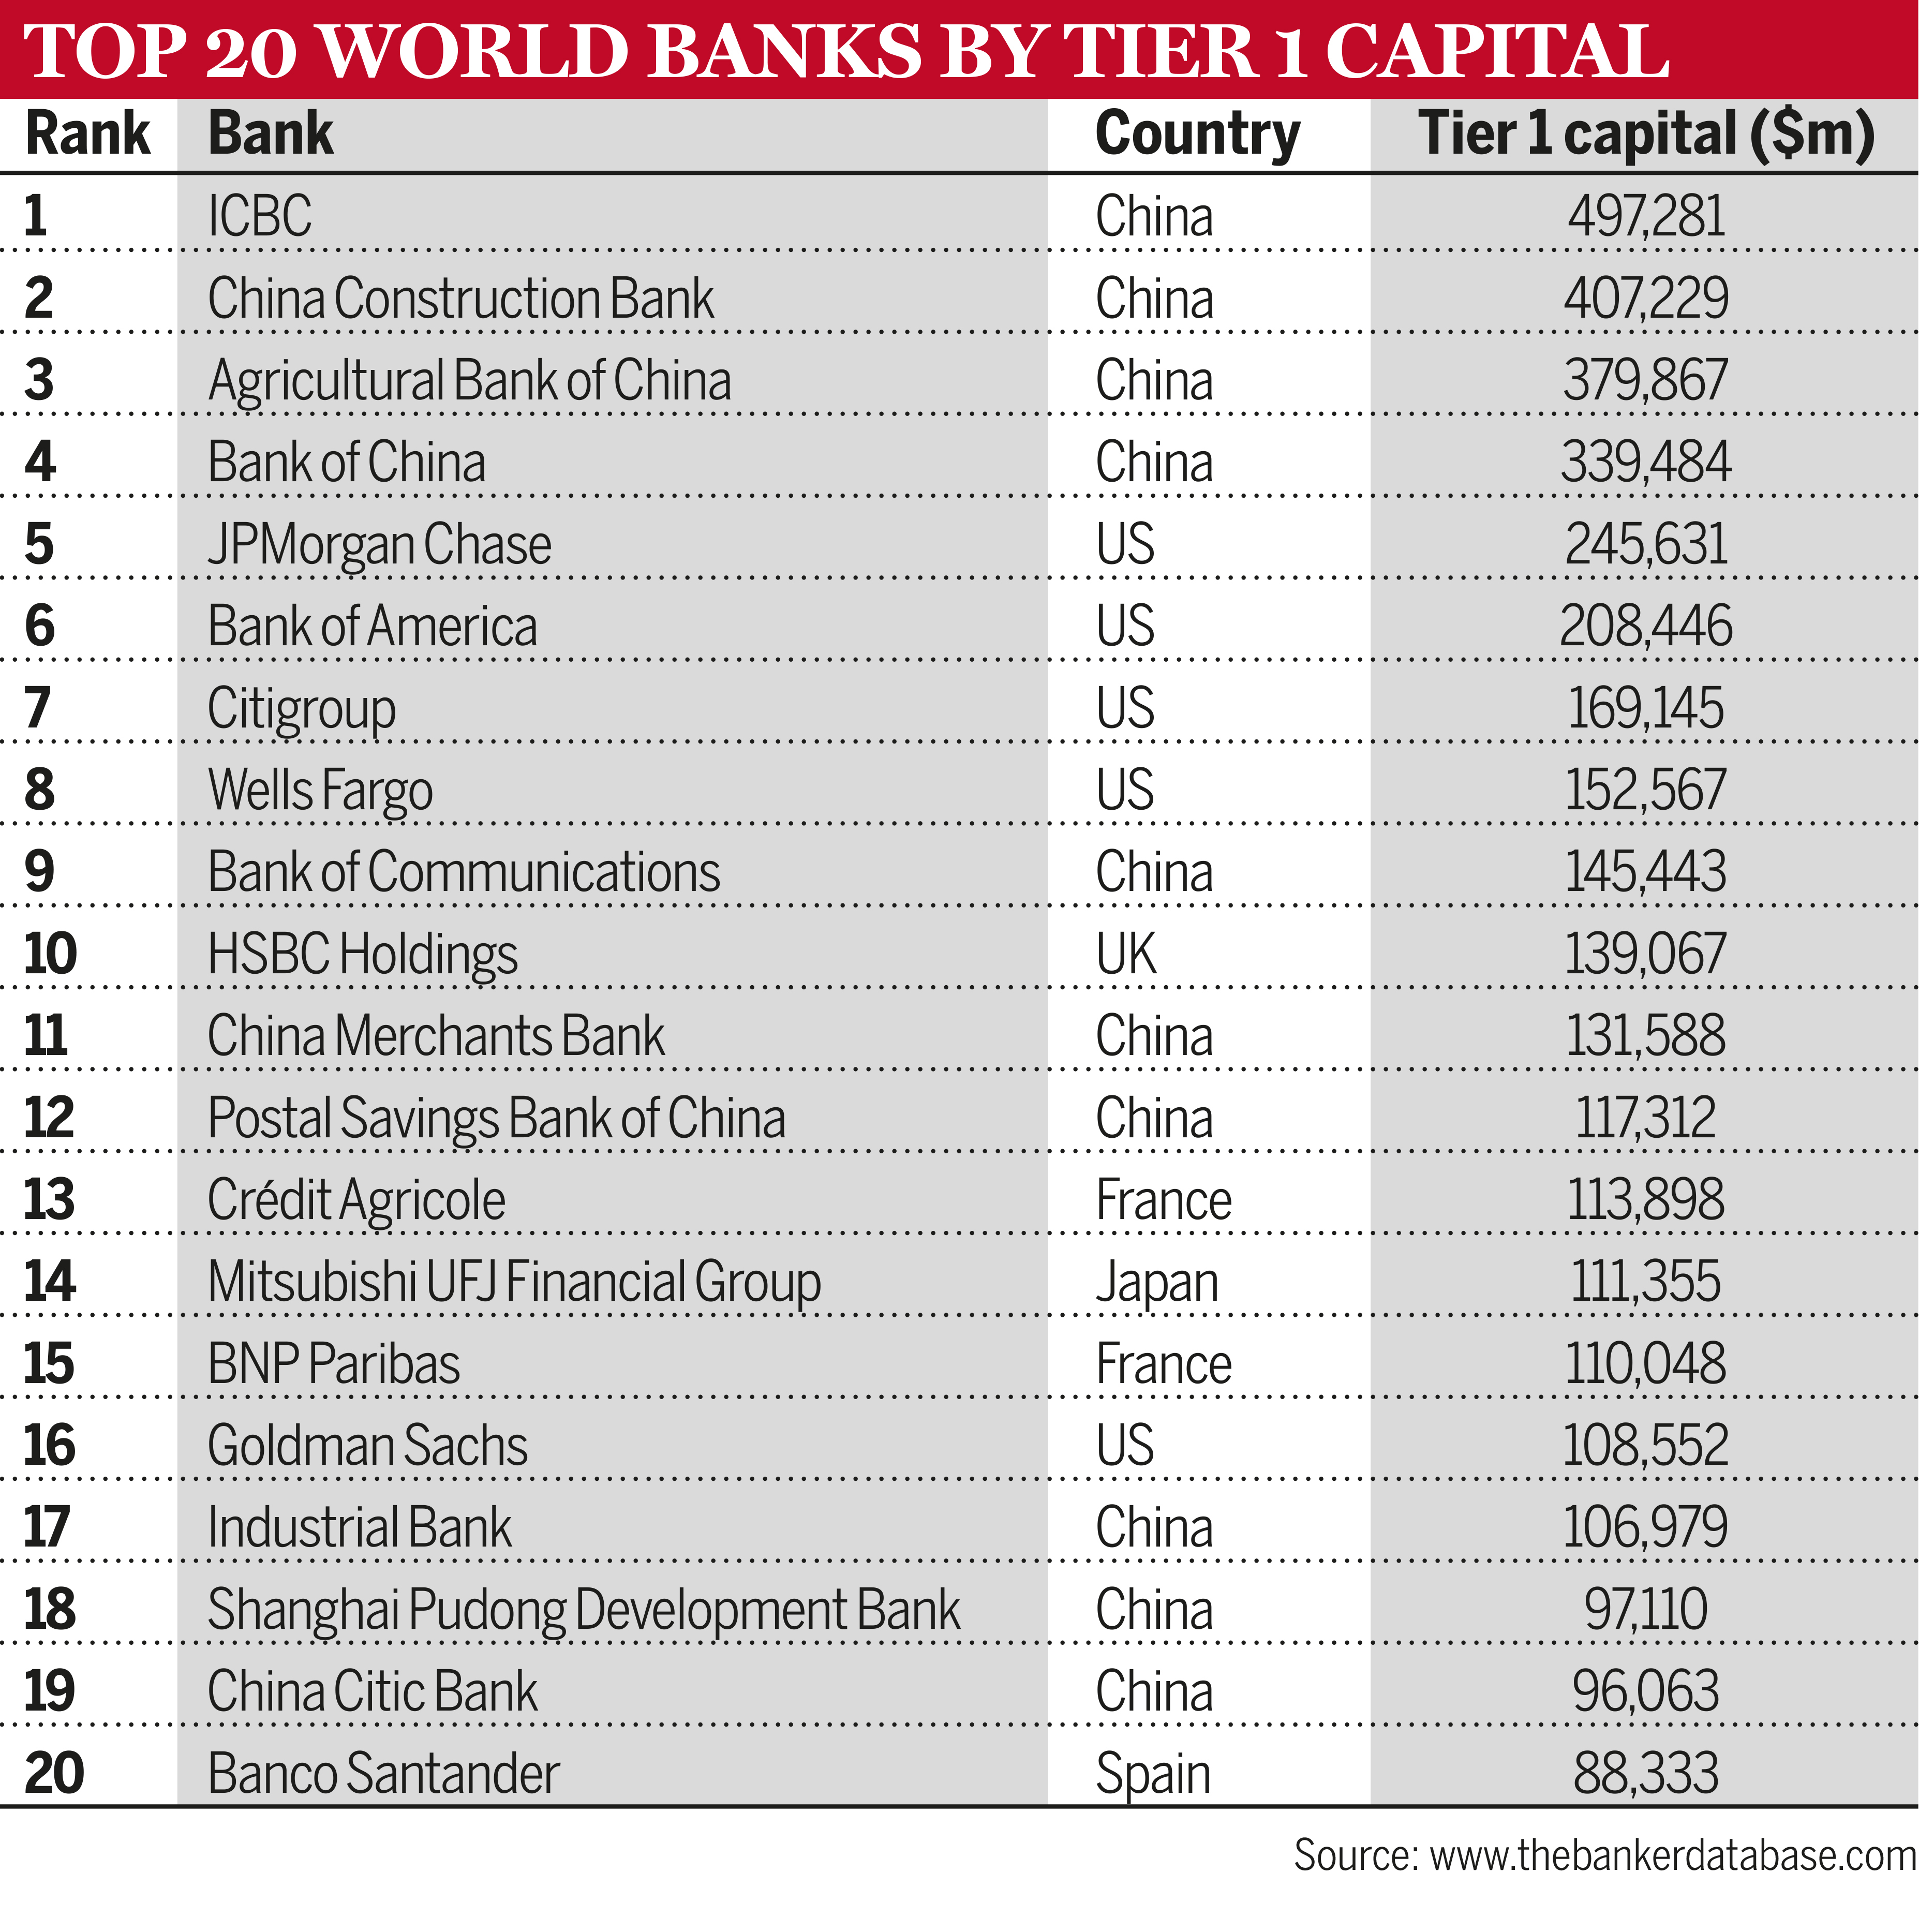 Top 20 world banks by Tier 1 capital